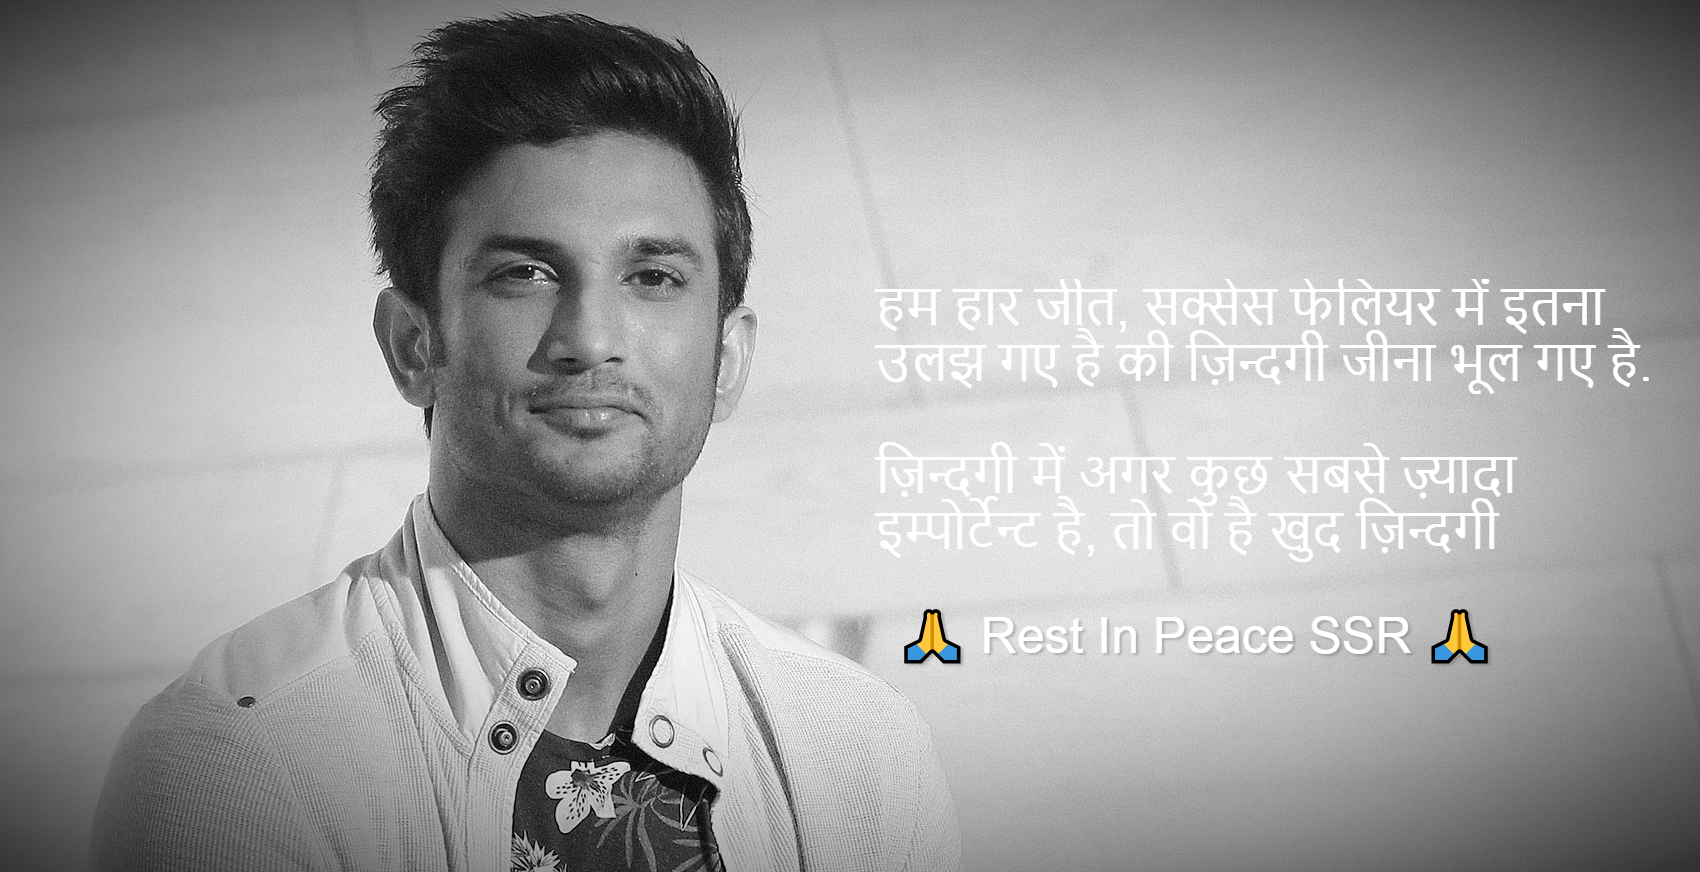 Learn a lesson from Sushant Singh Rajput’s death